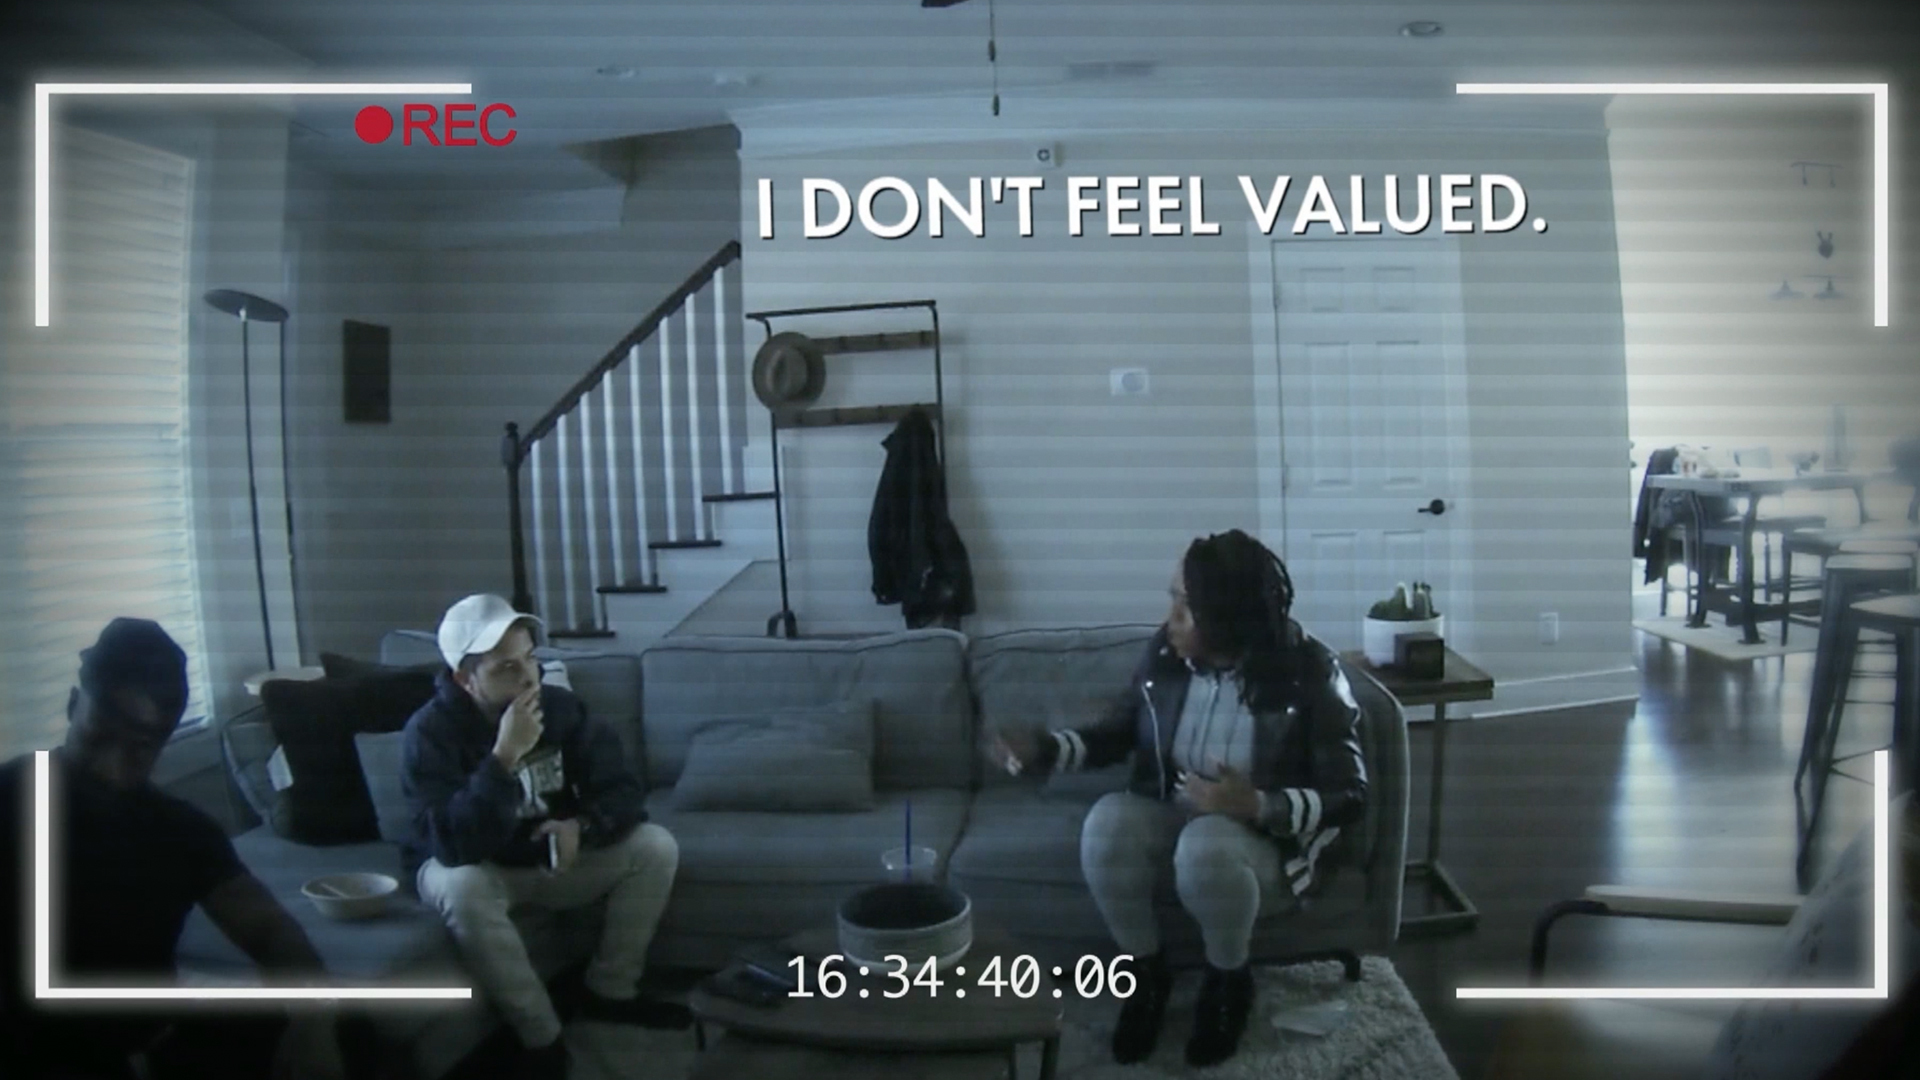 Watch 'I Don't Feel Valued' | Commit or Quit Video Extras